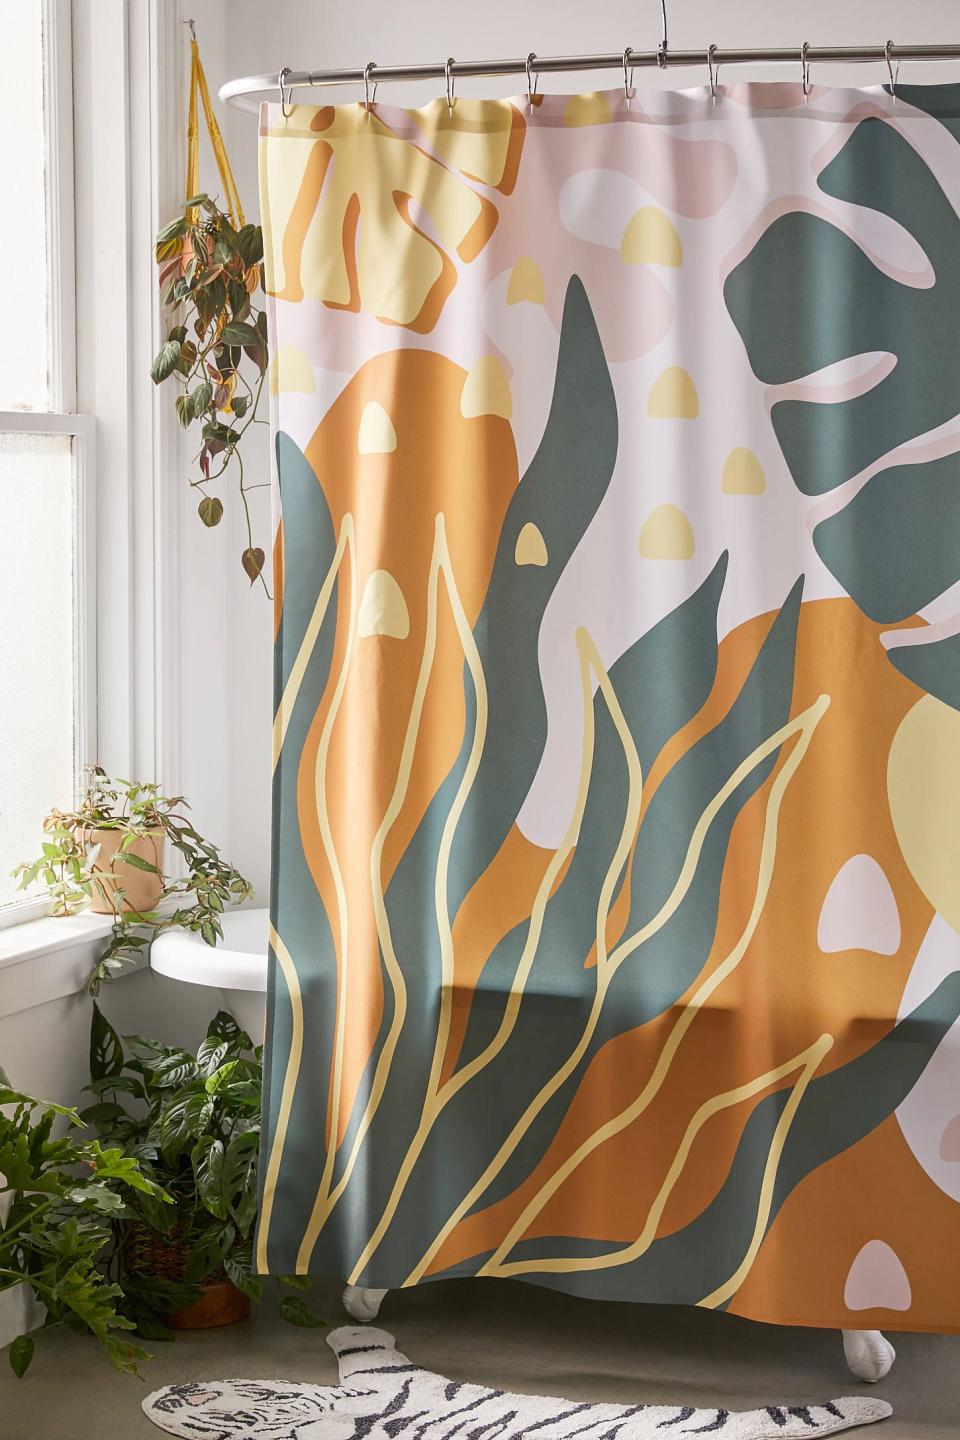 13) Alisa Galitsyna For Deny Floral Magic Shower Curtain